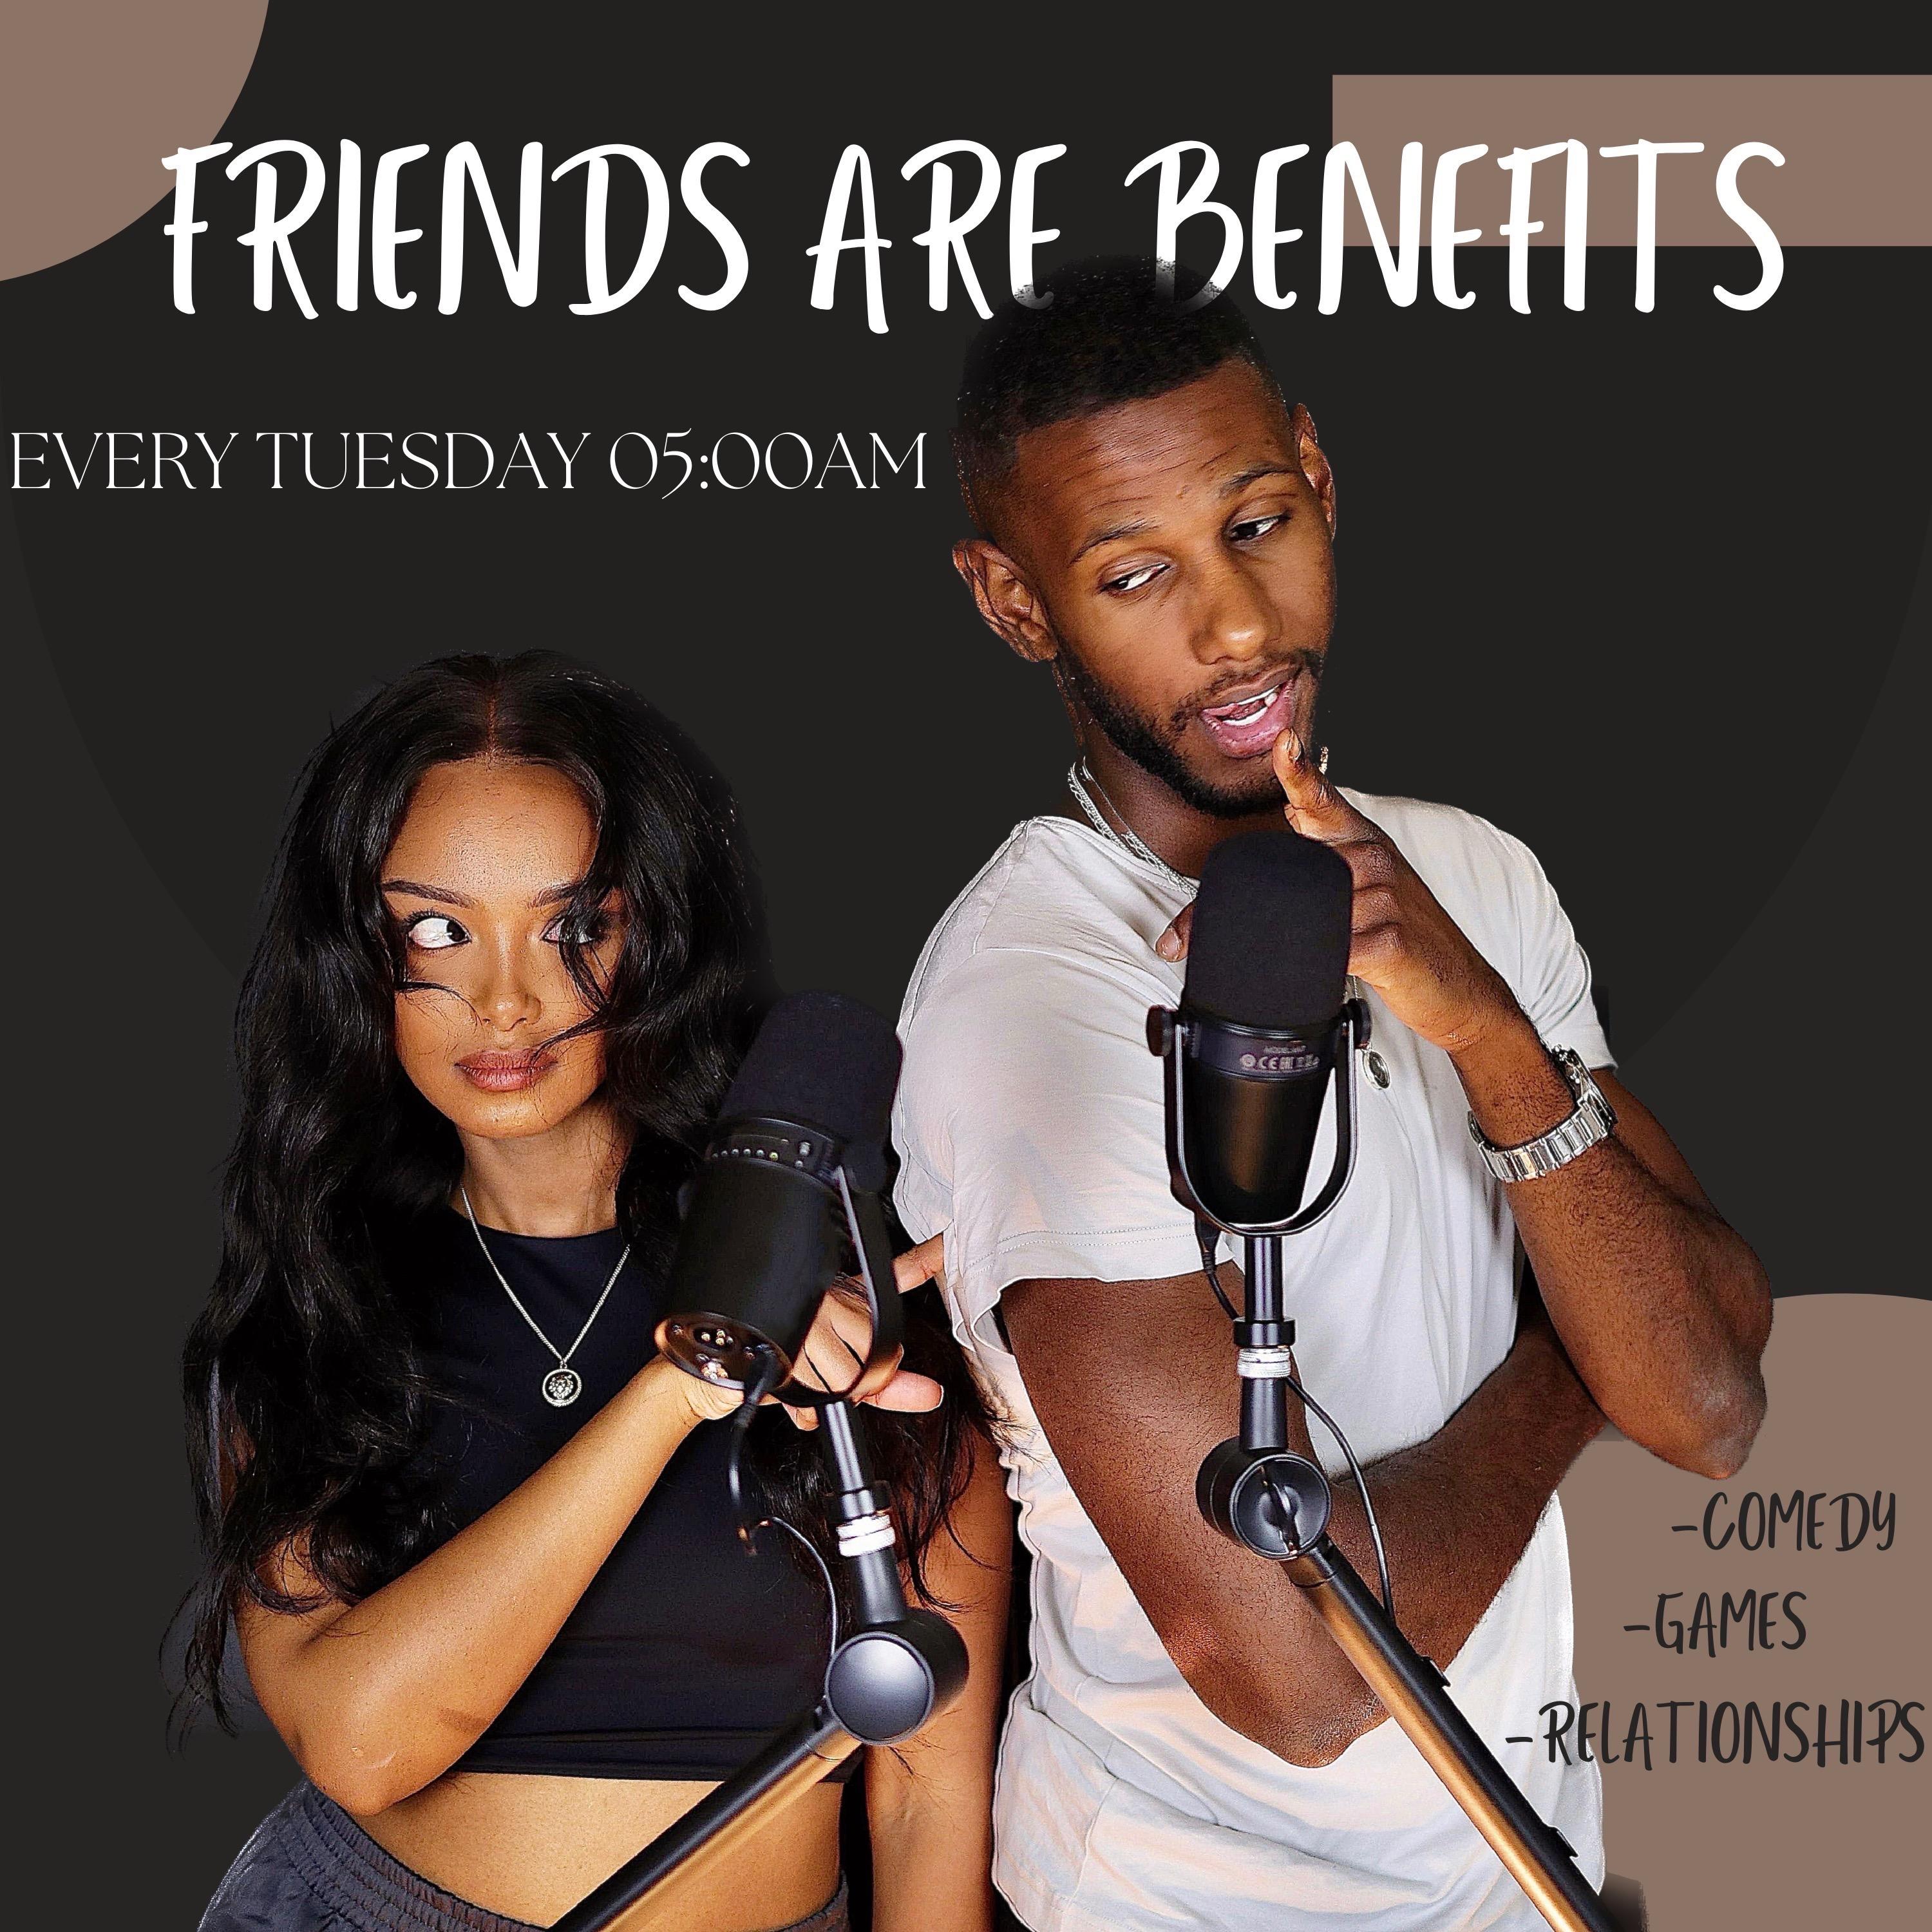 Friends are Benefits